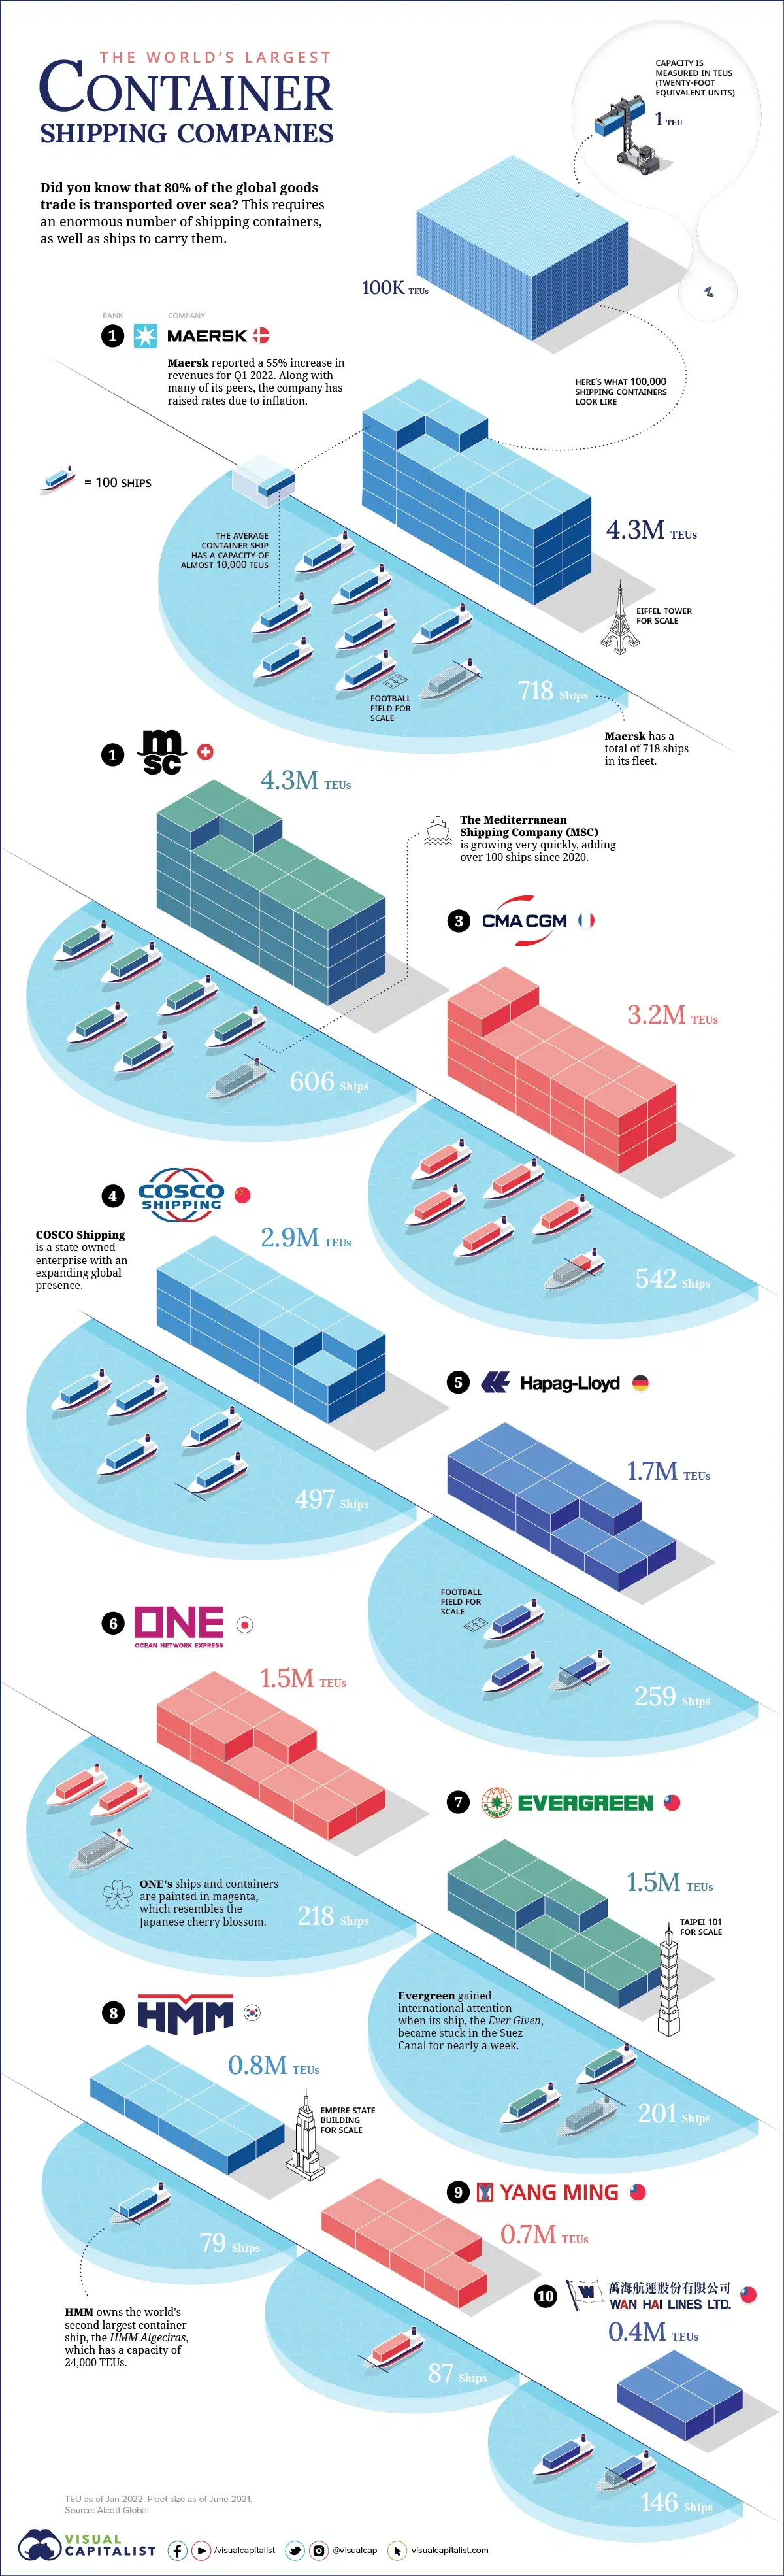 The World’s Largest Container Shipping Companies